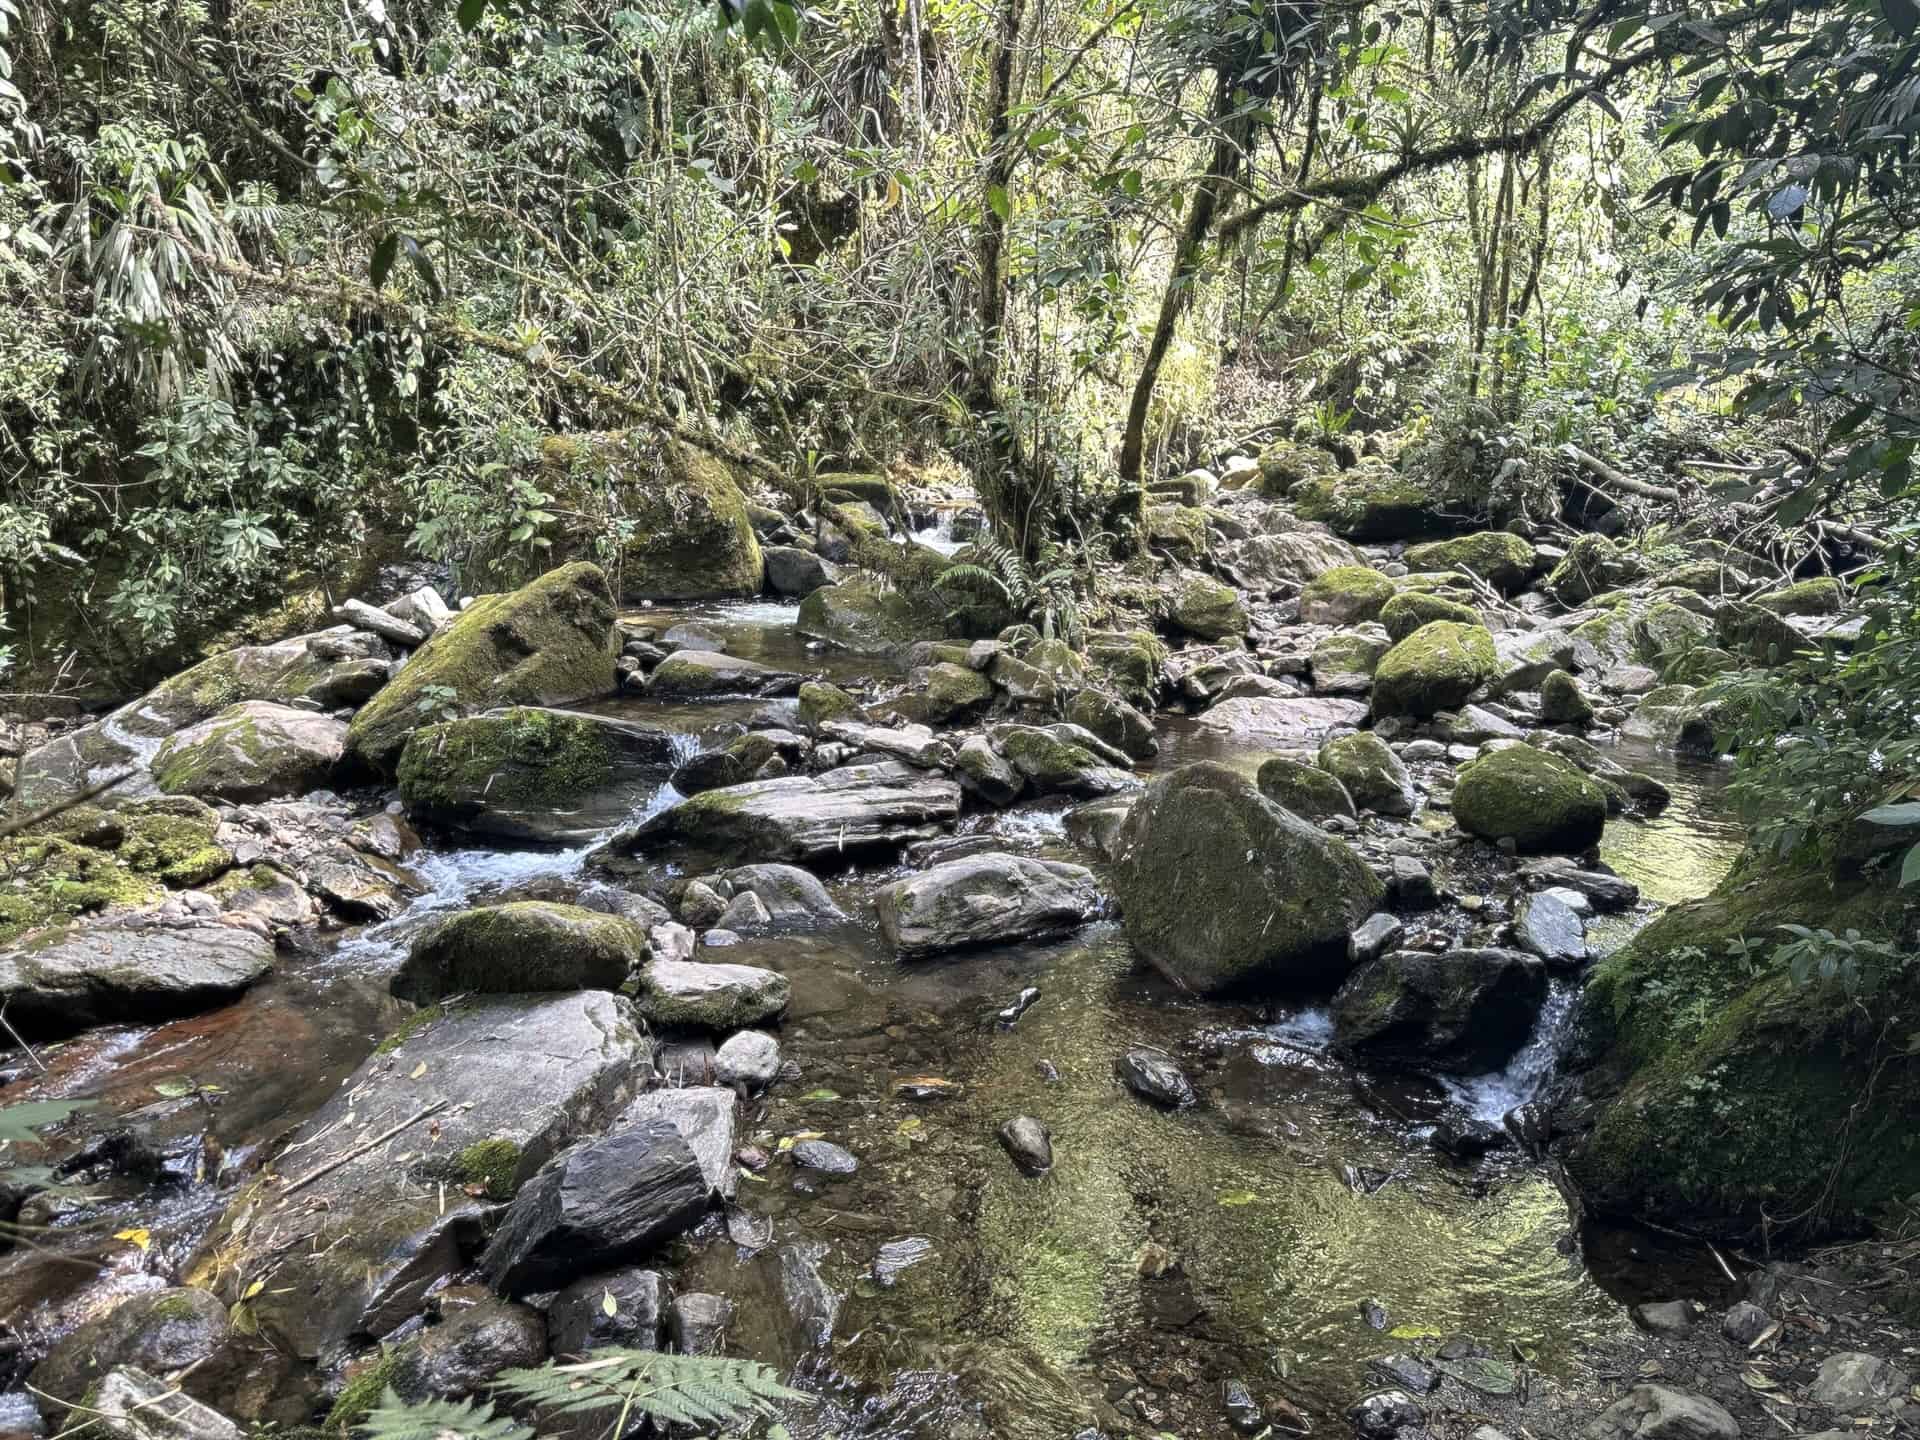 The river during dry season at Cocora Valley in Quindío, Colombia